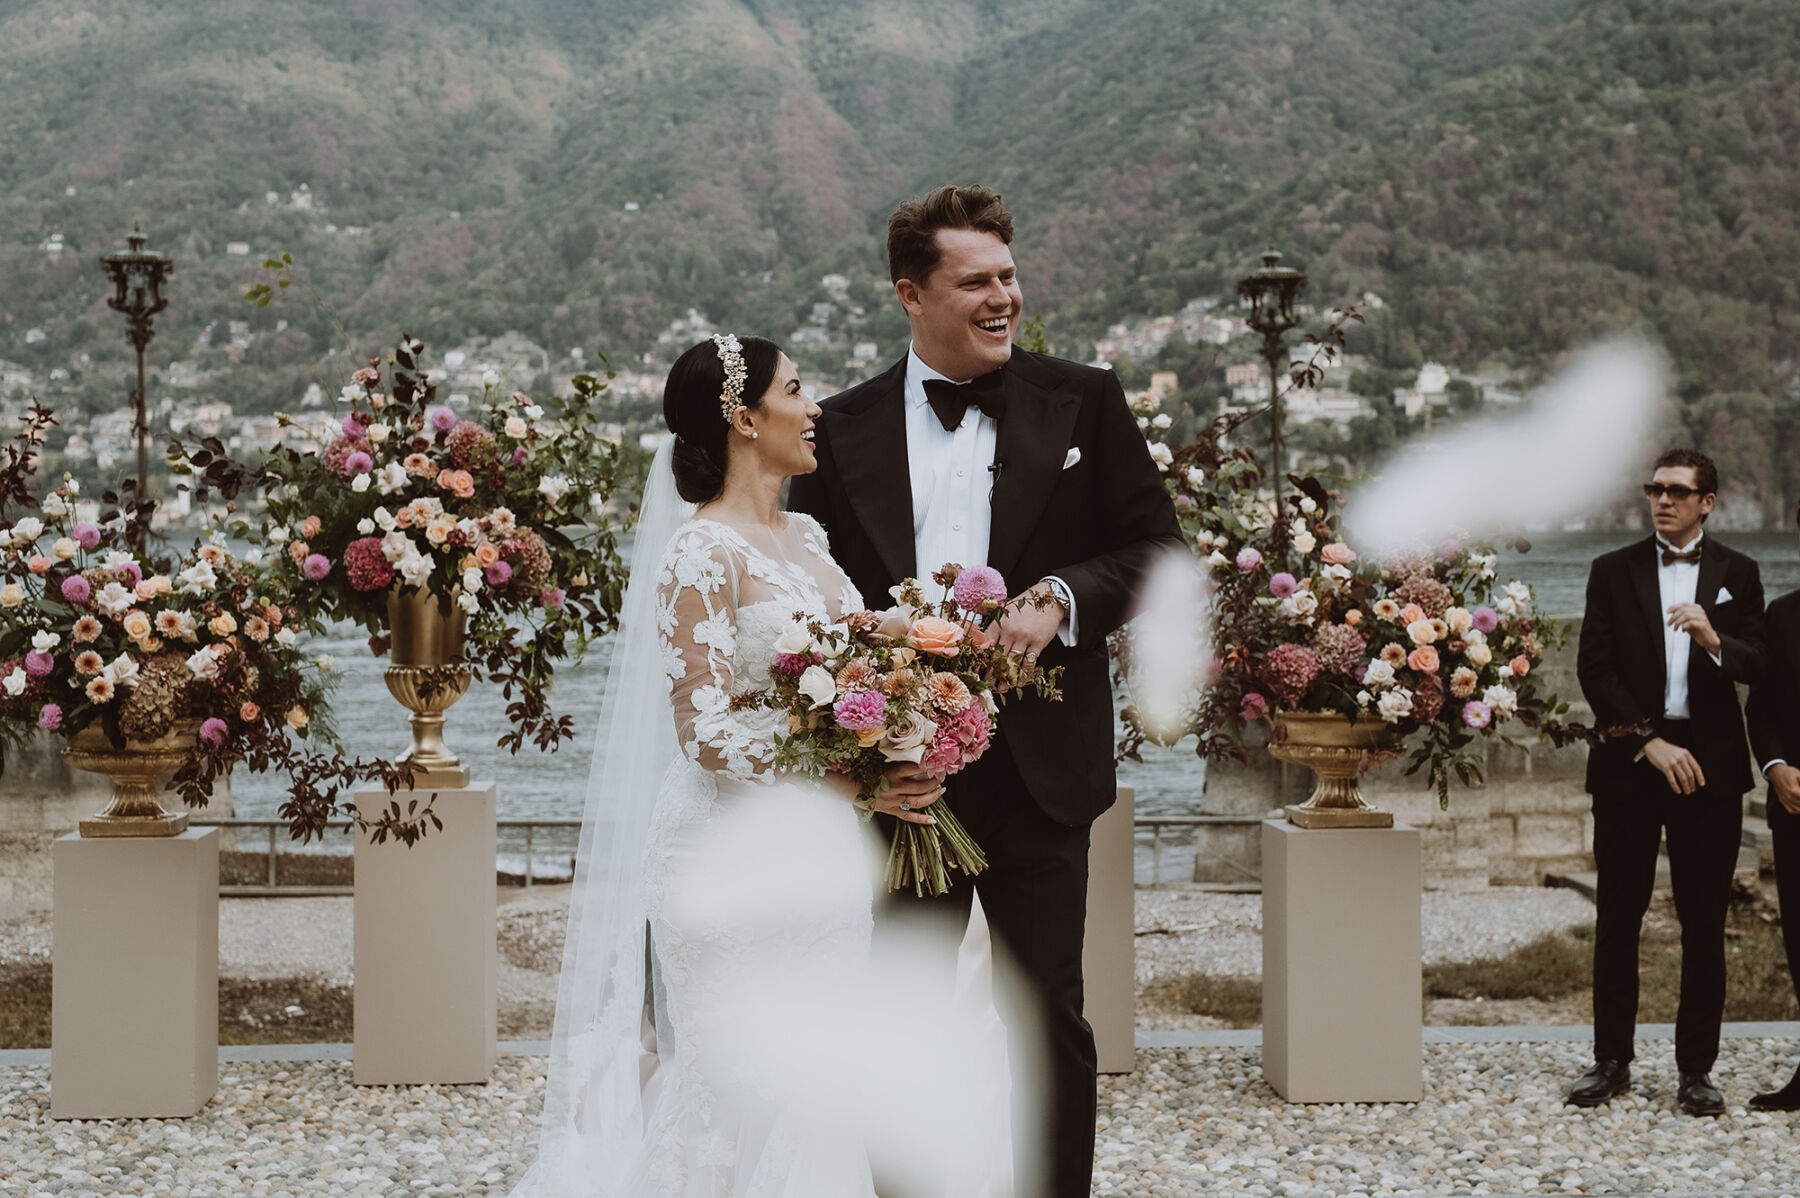 Bride & groom at their wedding ceremony in Lake Como Italy, surrounded by lavish flowers